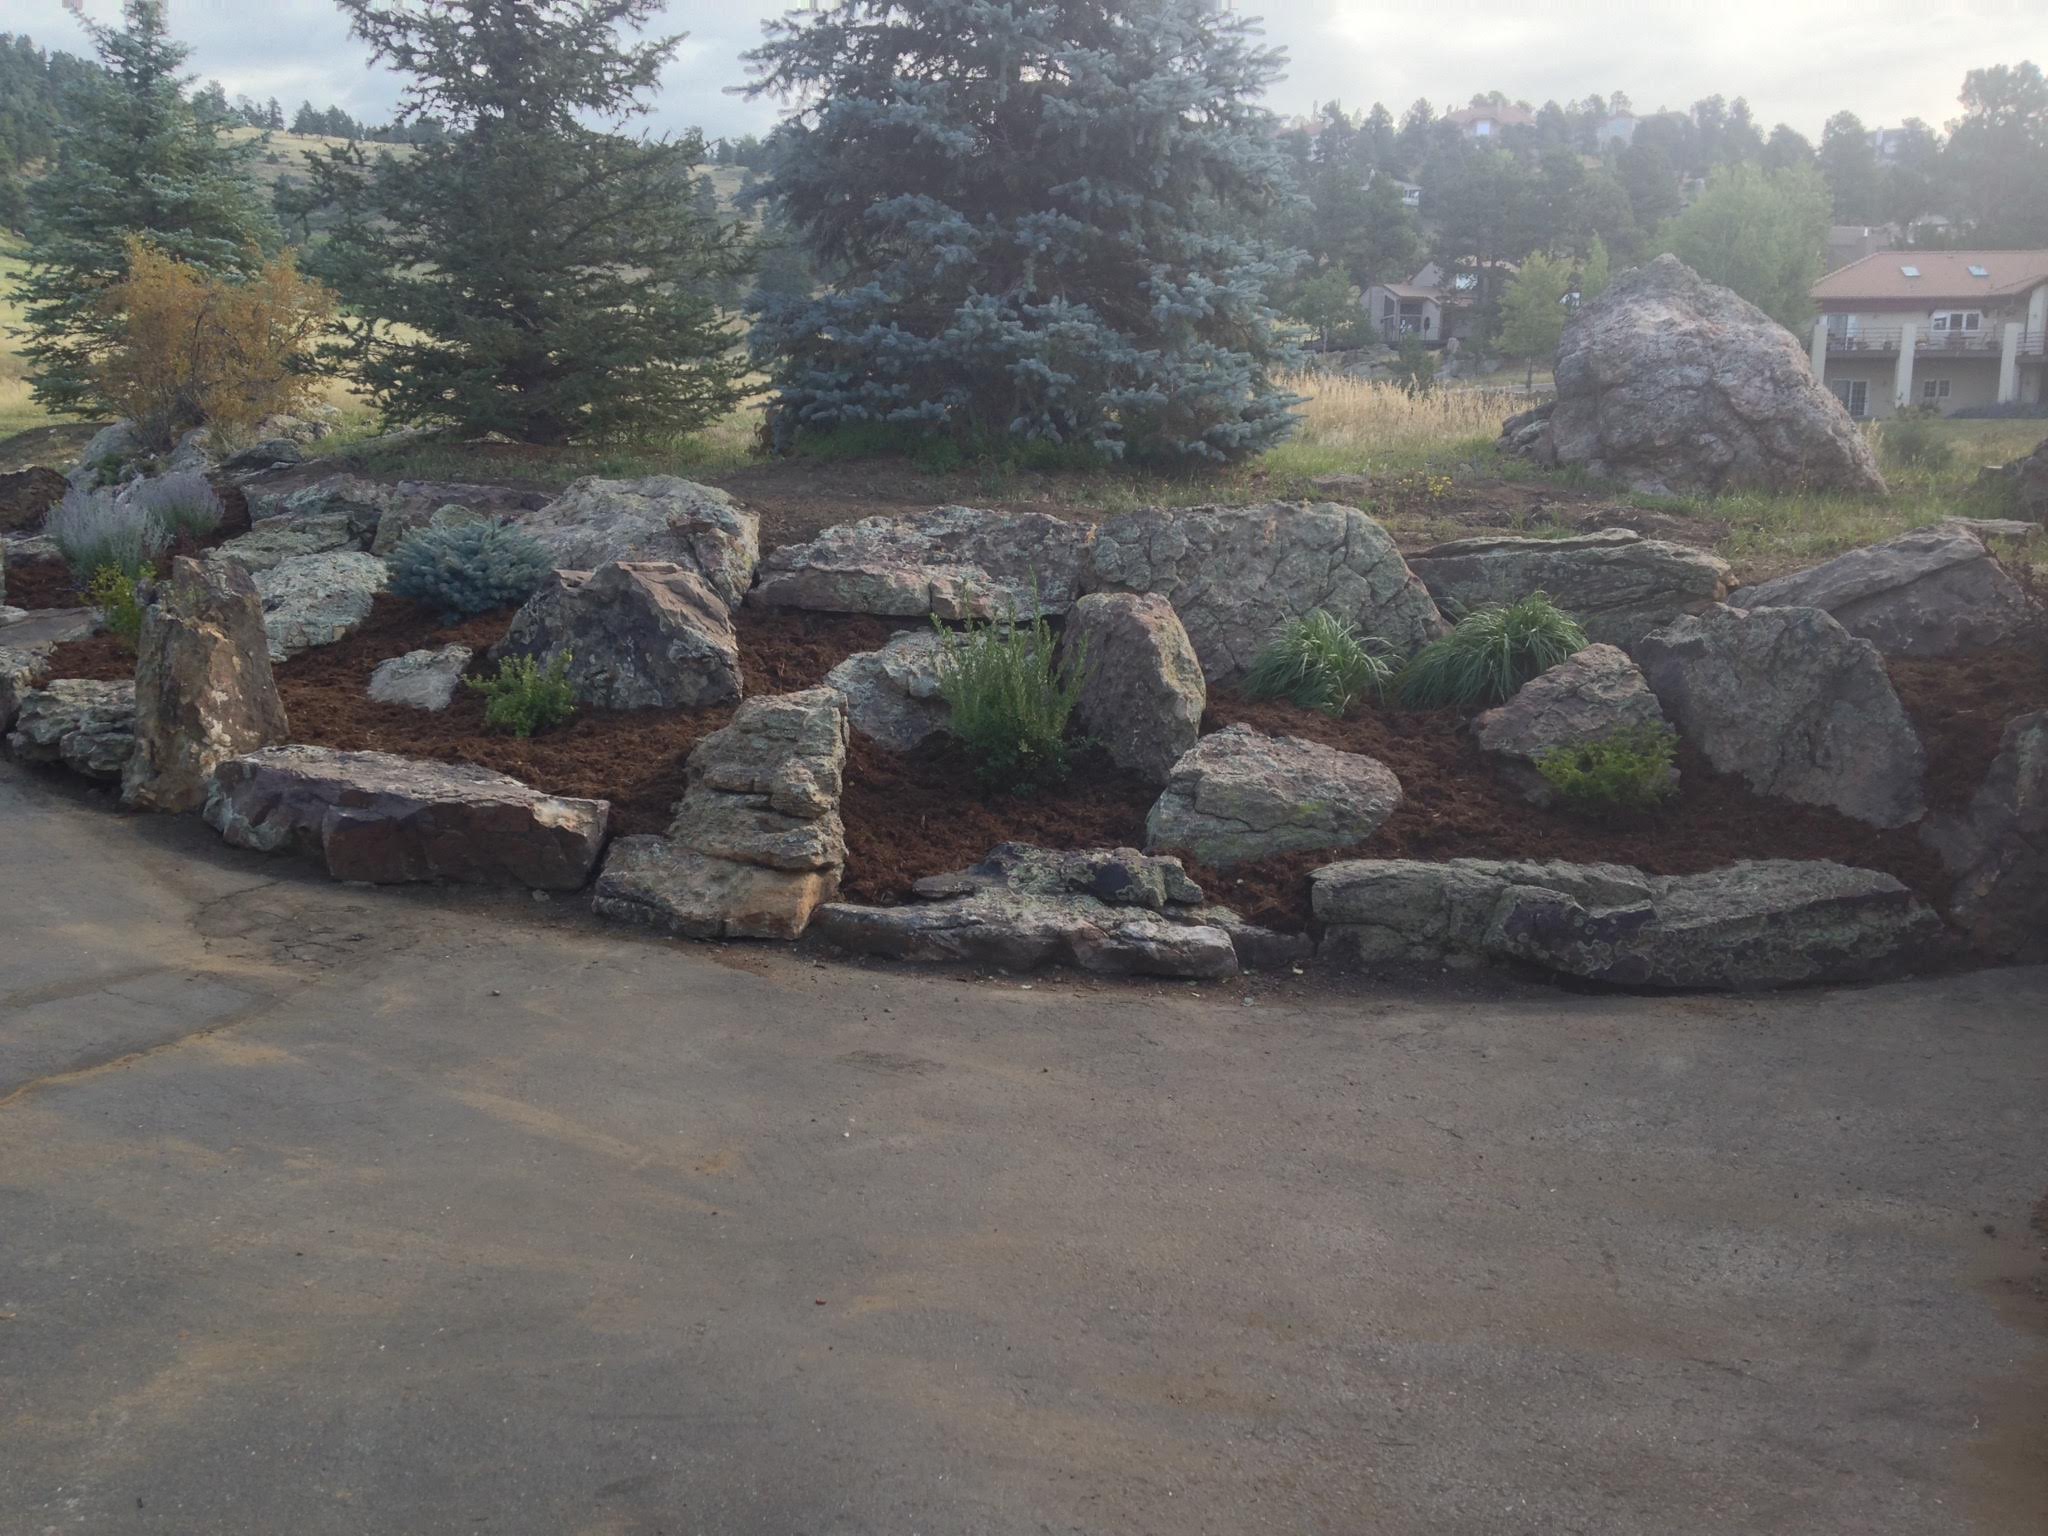 Large stone landscaping next to driveway, with bushes